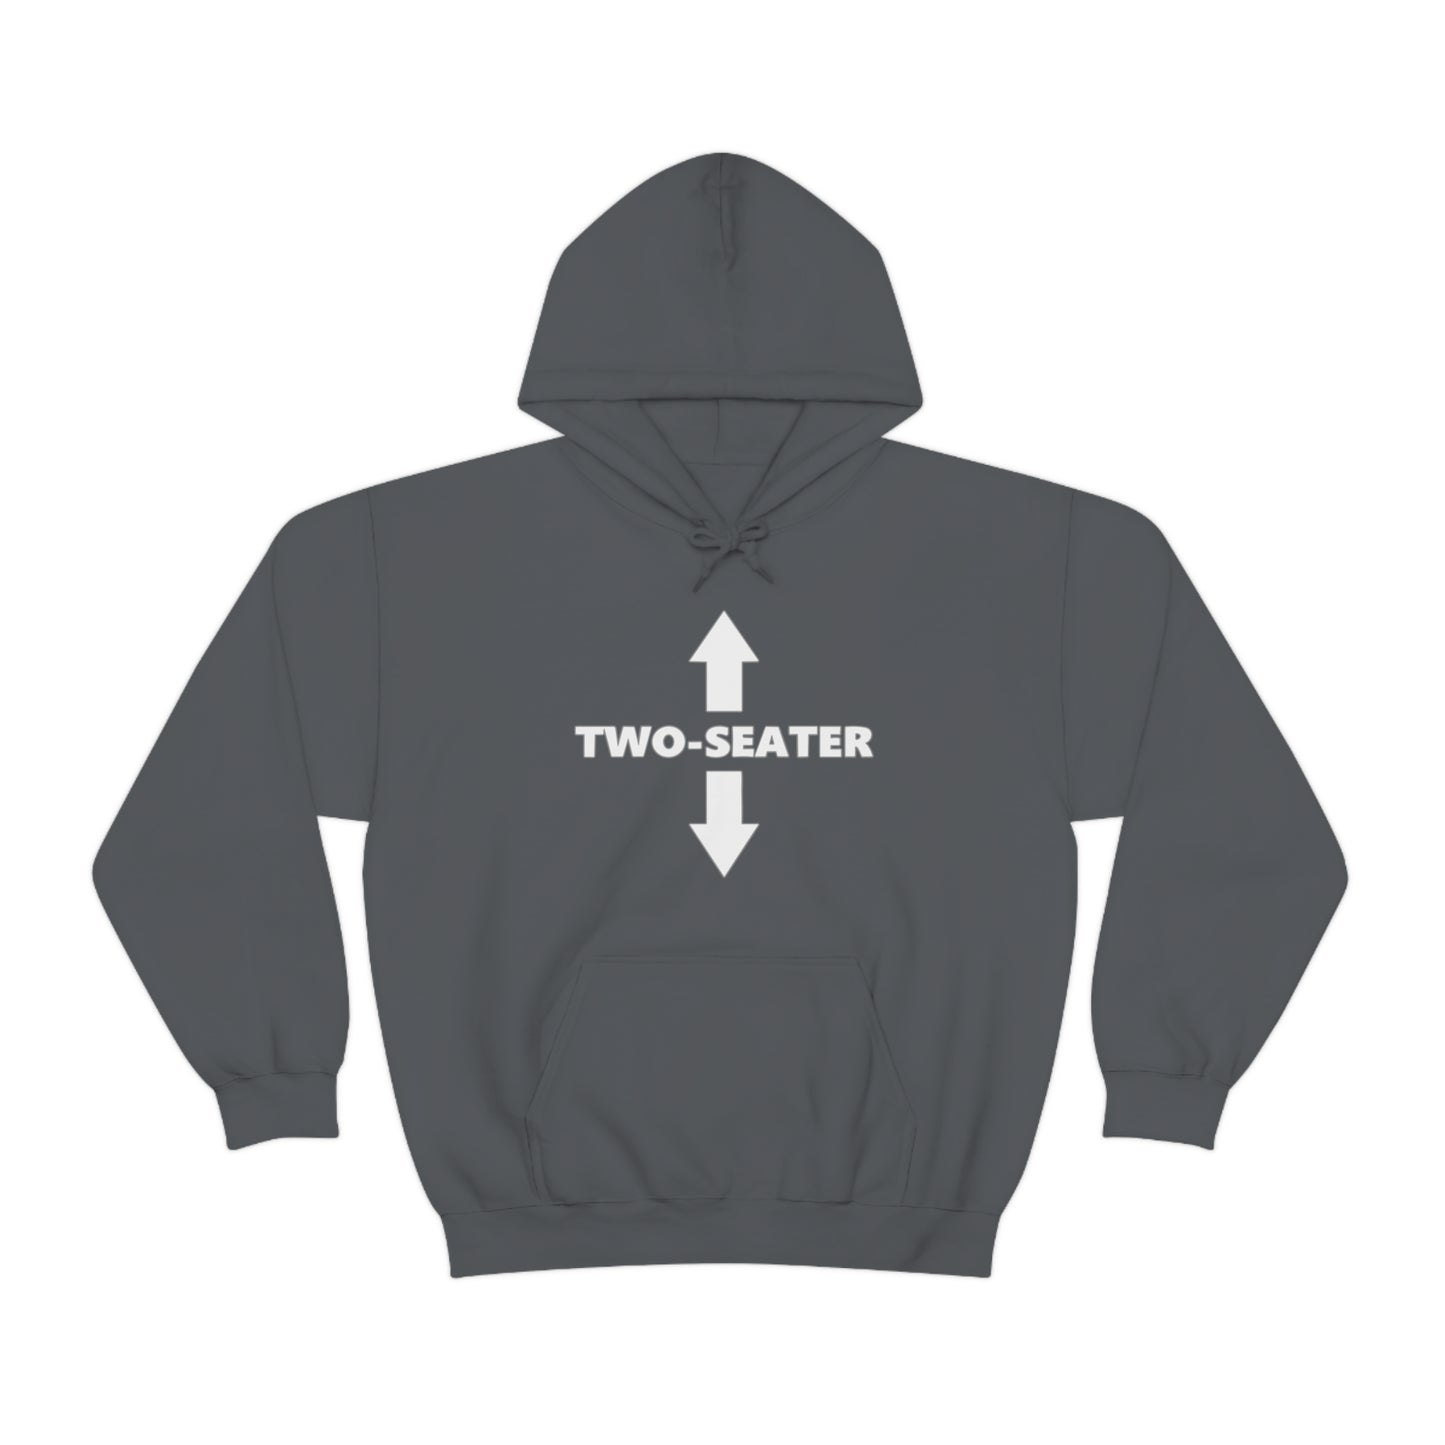 "Two-Seater" Hoodie